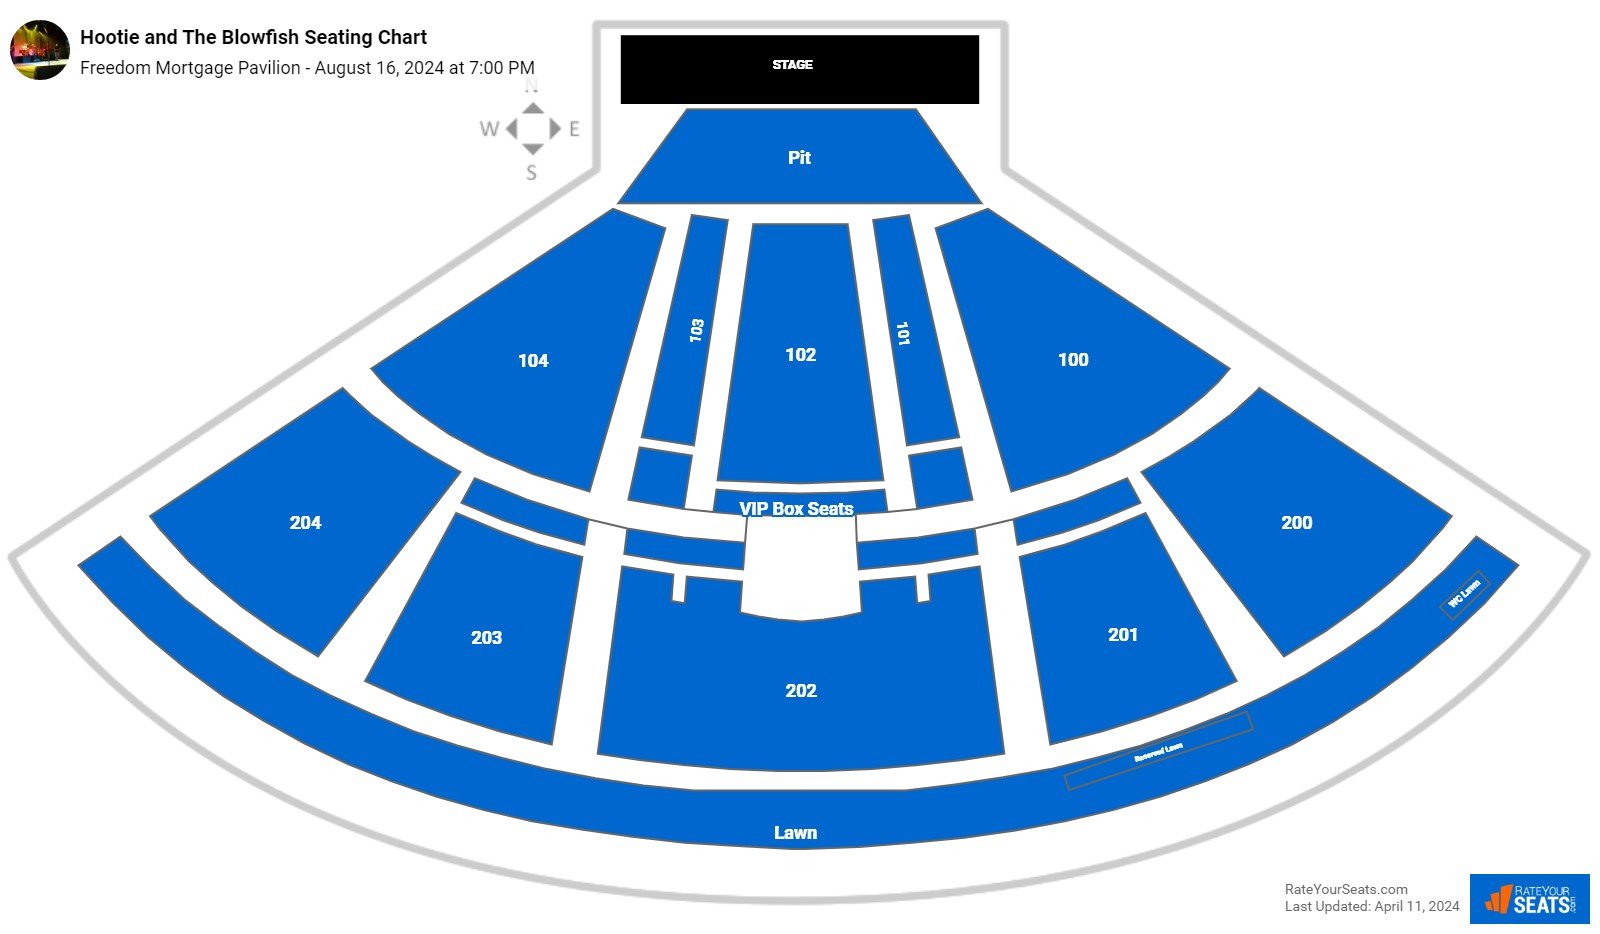 Hootie and The Blowfish seating chart Freedom Mortgage Pavilion